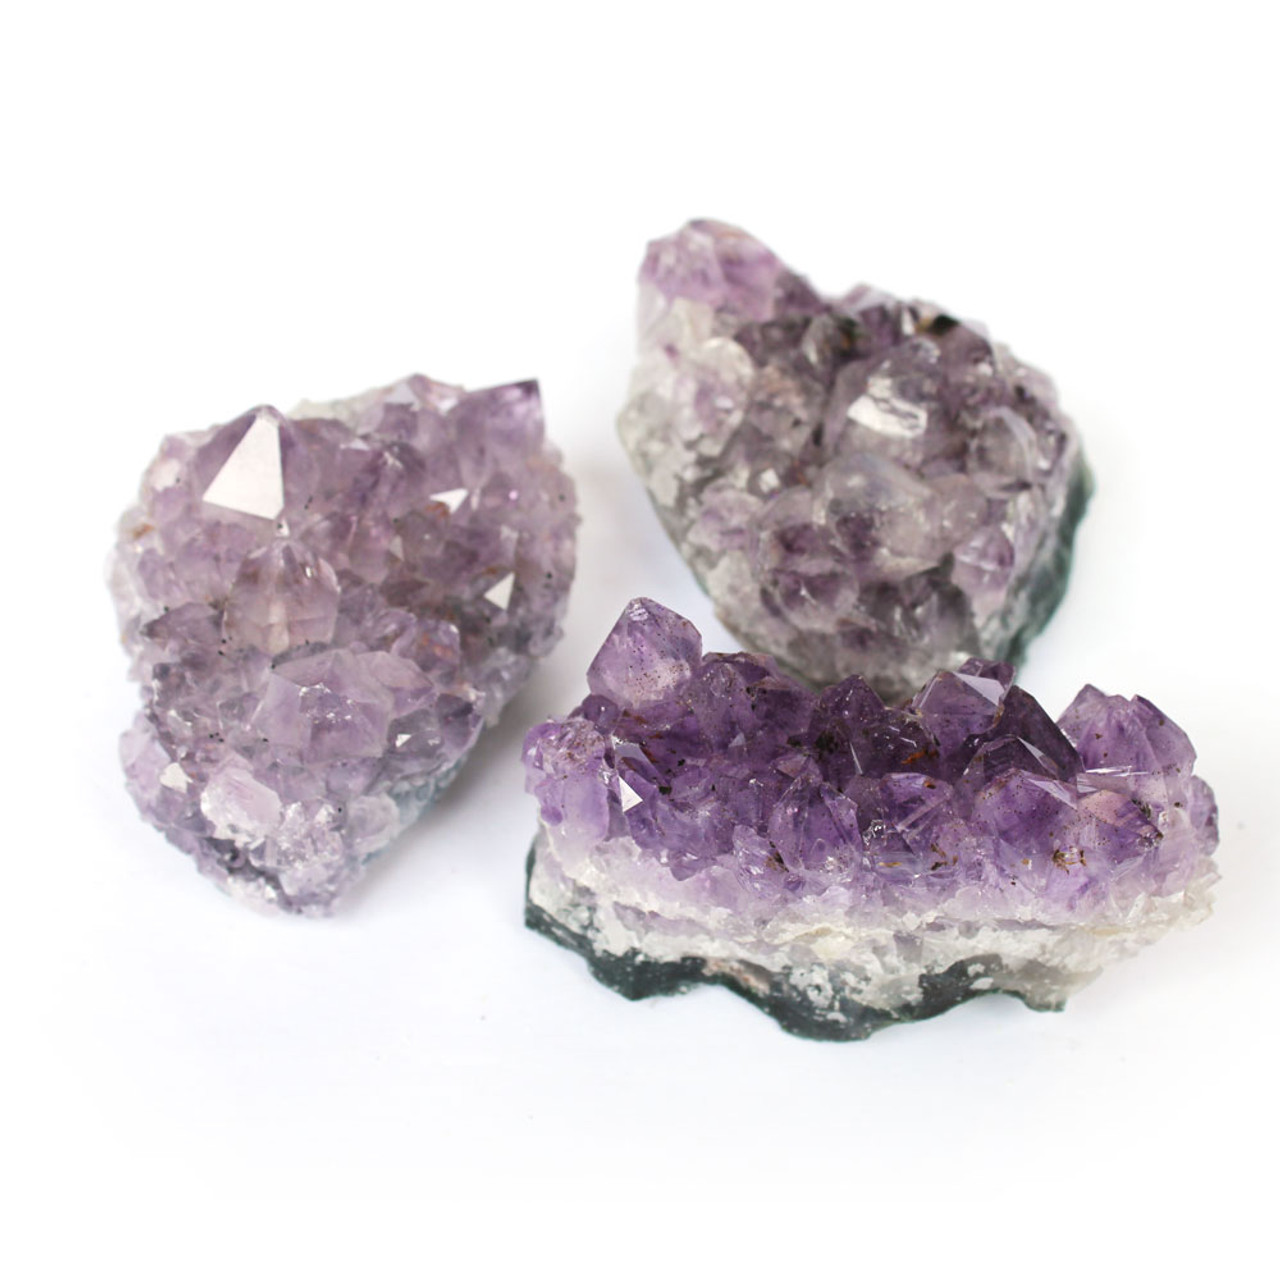 Amethyst Druze Crystal - Surrender To Happiness